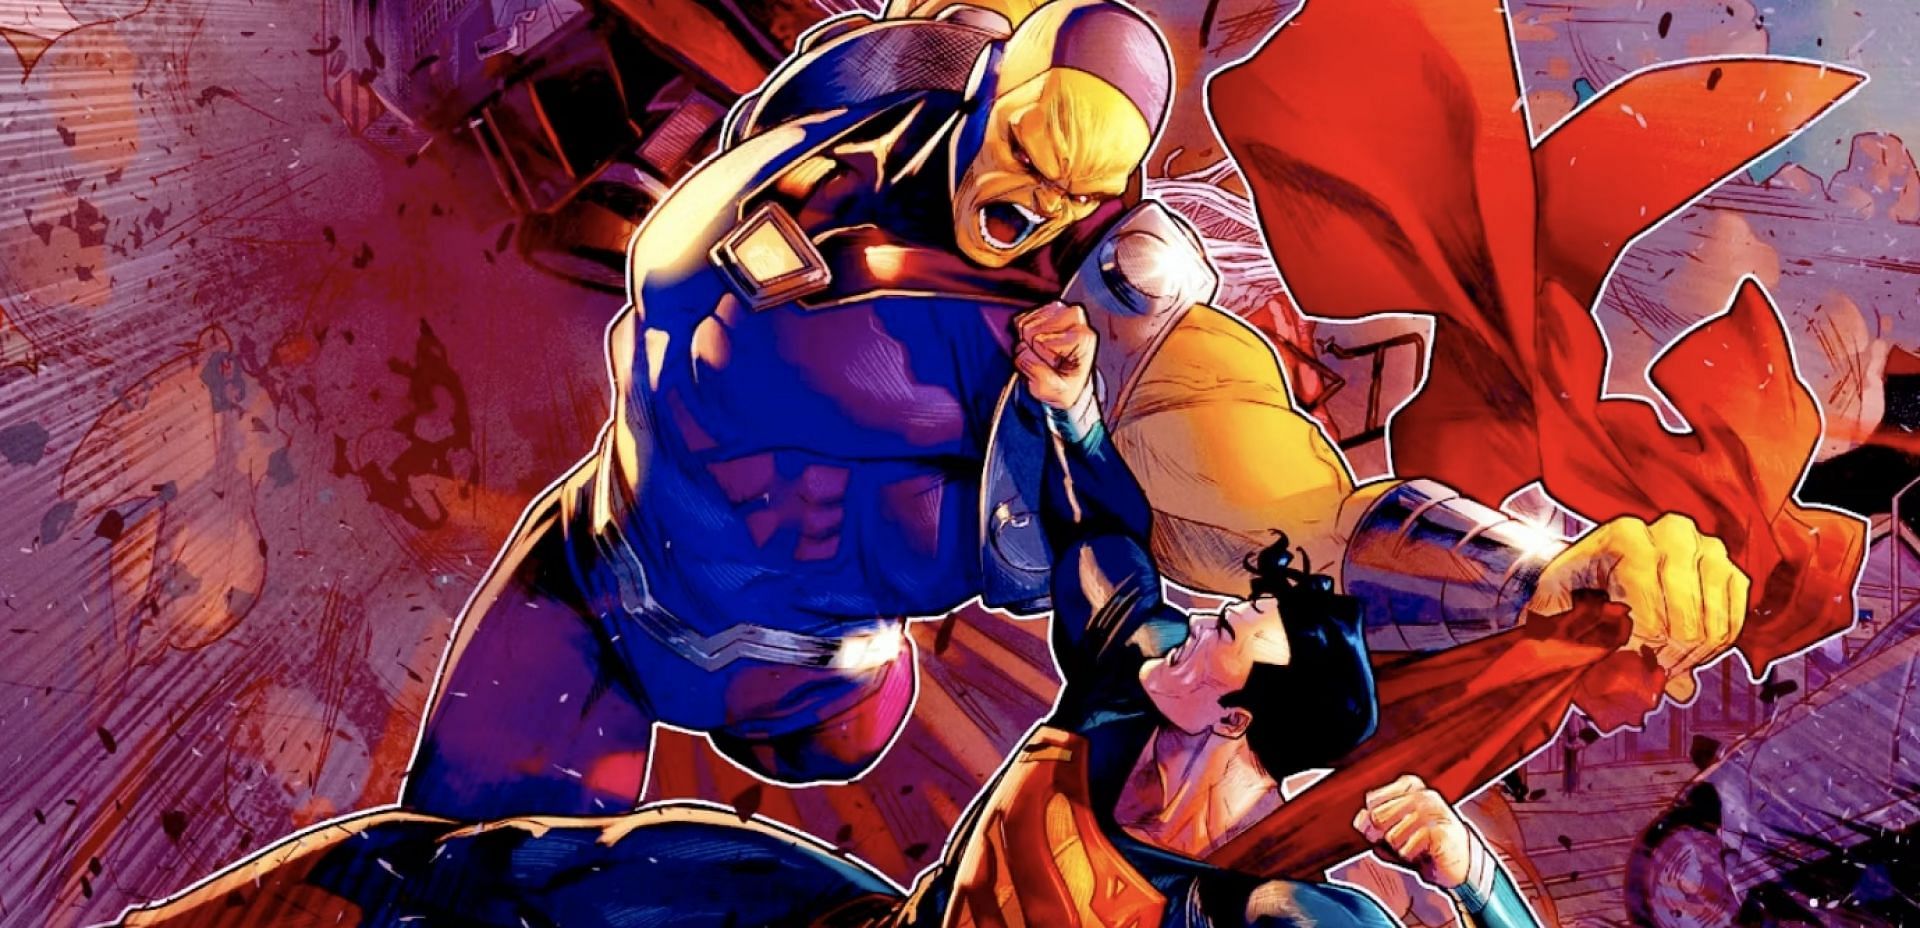 The Man of Tomorrow trapped in a dreamlike state, while Mongul drains his life force (Image via DC Comics)